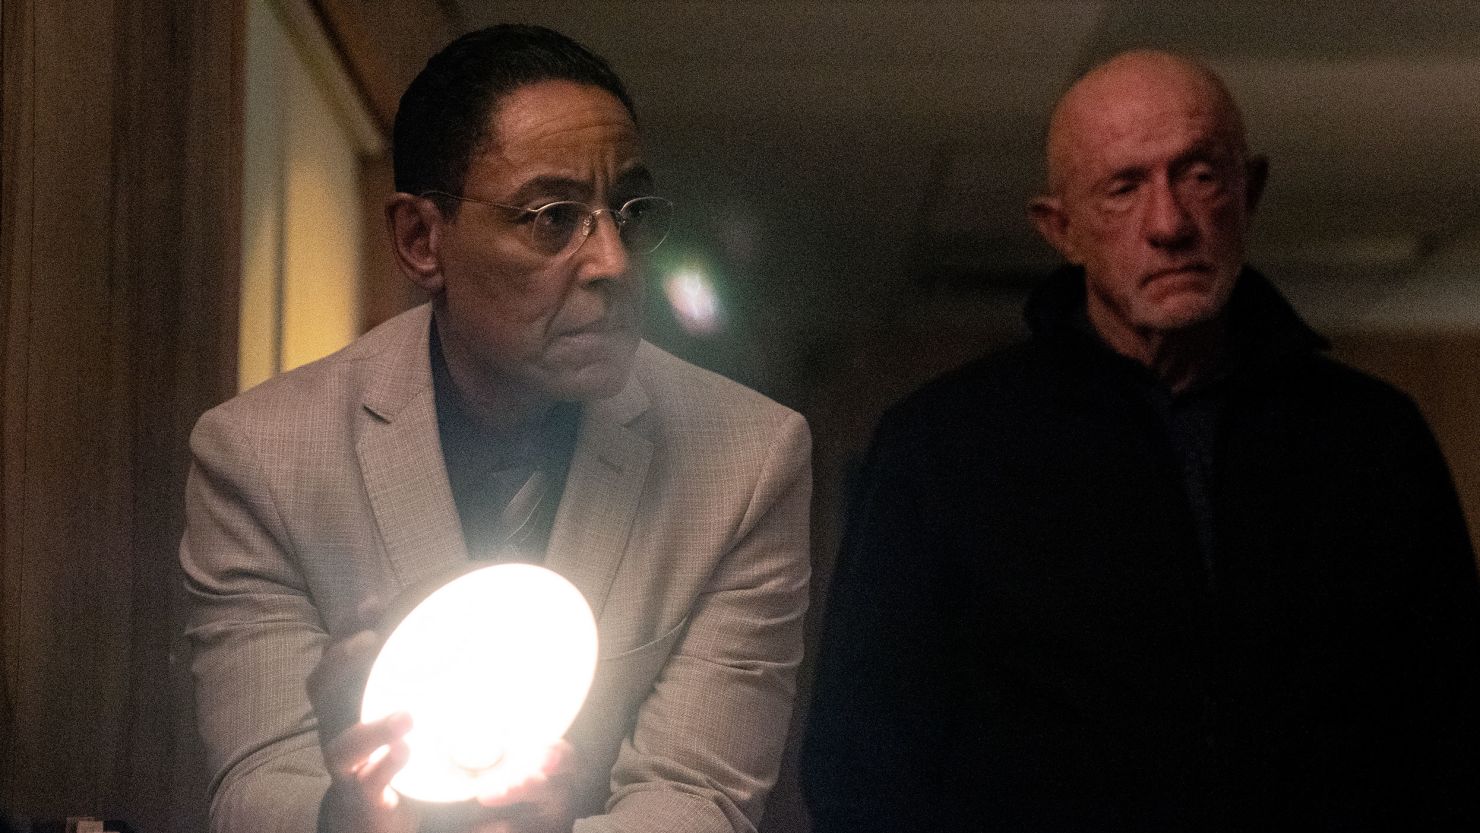 Giancarlo Esposito as Gus Fring, Jonathan Banks as Mike Ehrmantraut in 'Better Call Saul.'